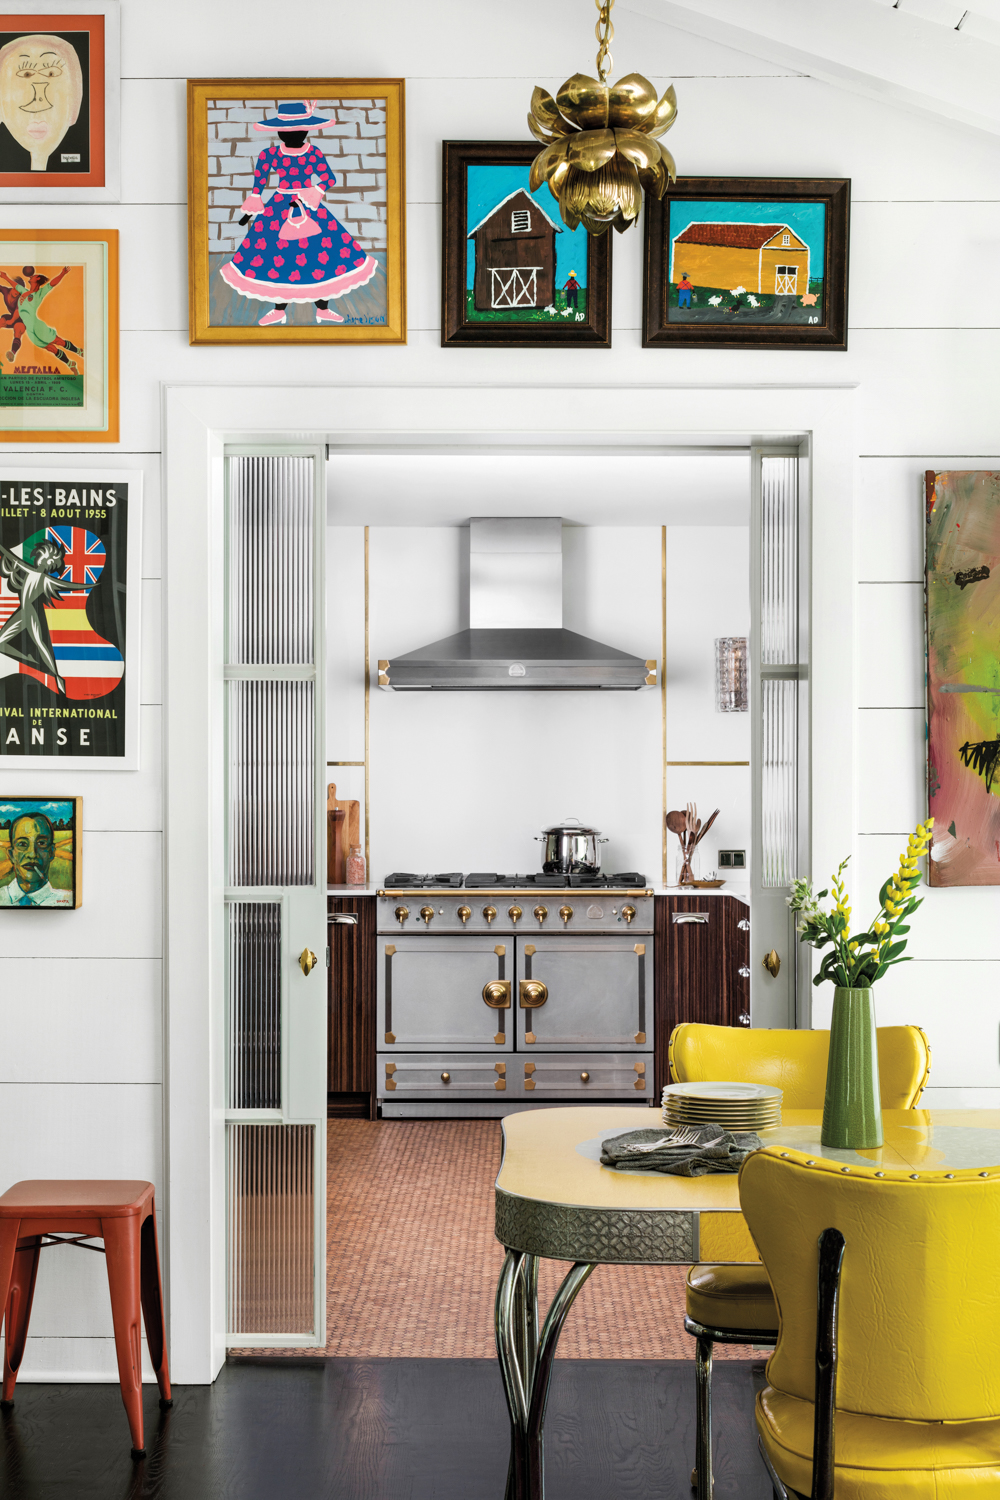 Pick Up On The Color Cues In This Fun Atlanta Kitchen